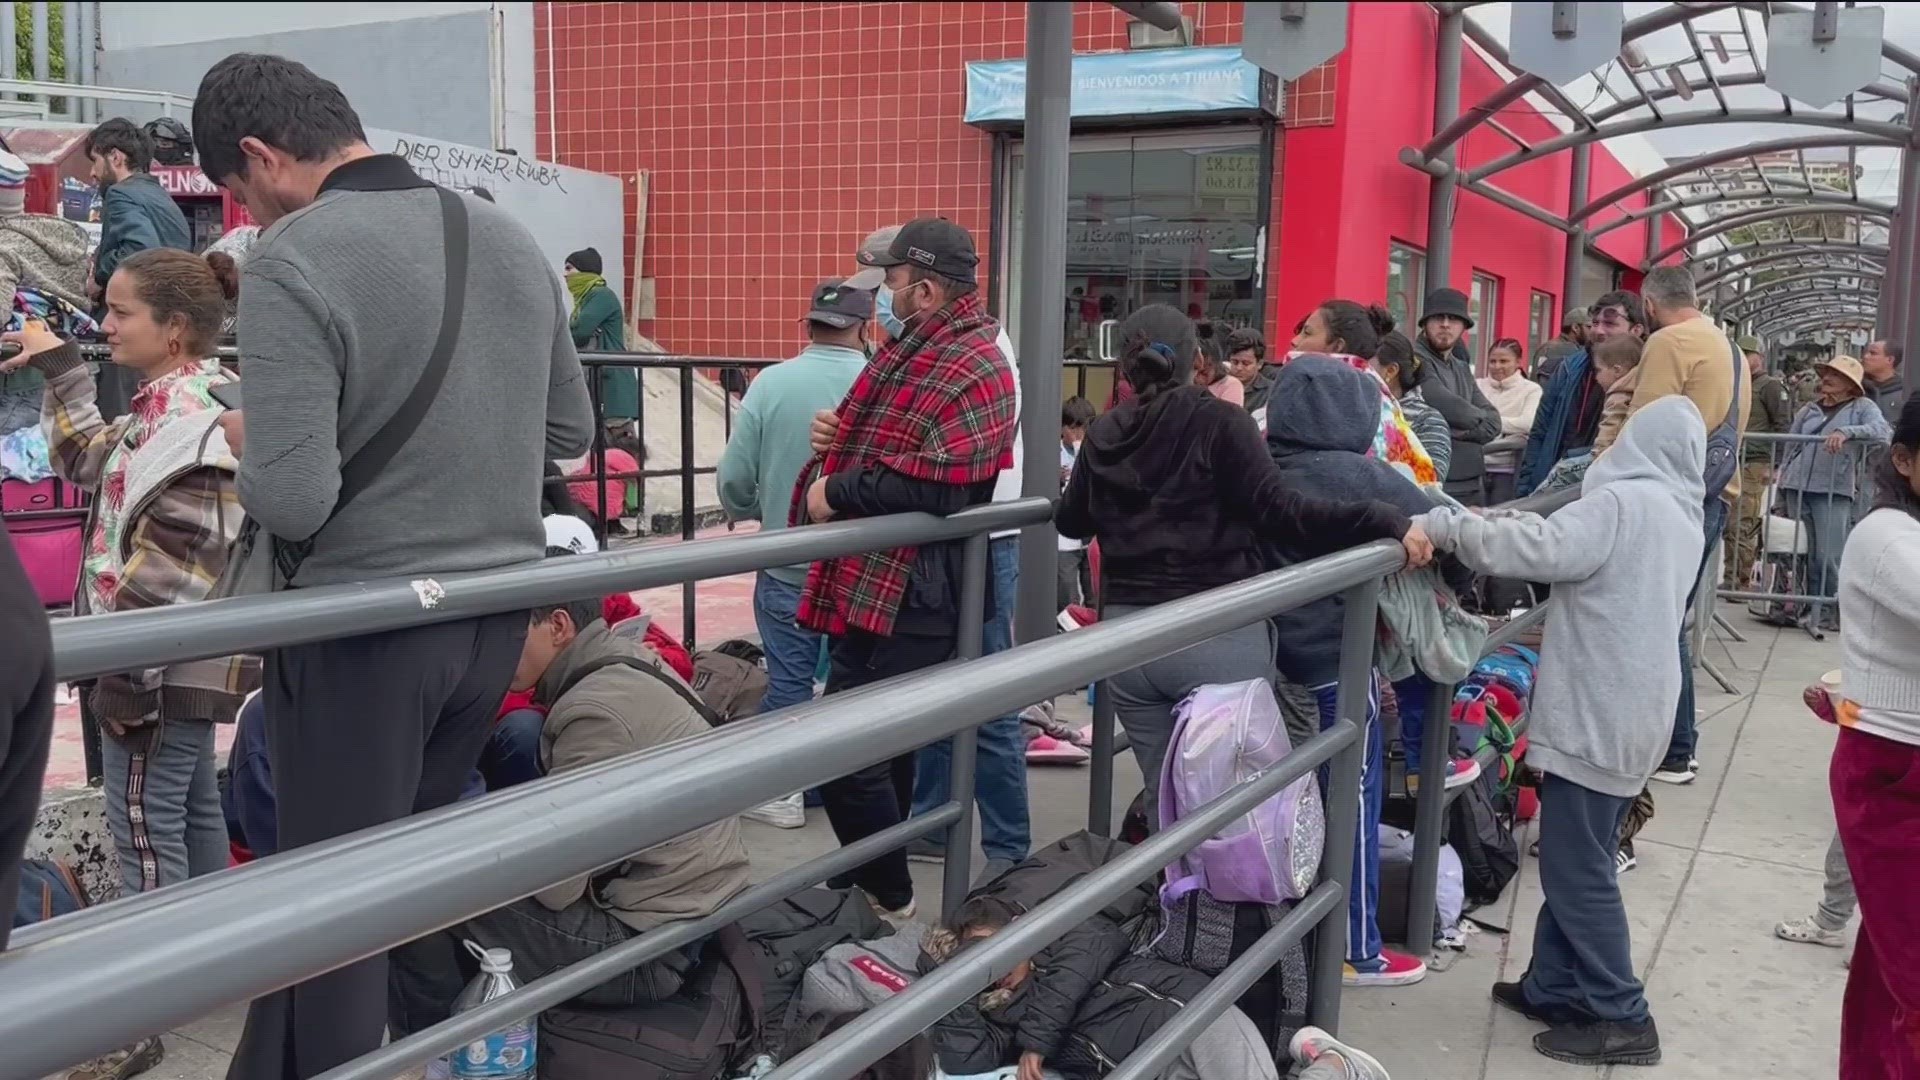 A little more than 100 people are seeking asylum in Tijuana at the Port of Entry.